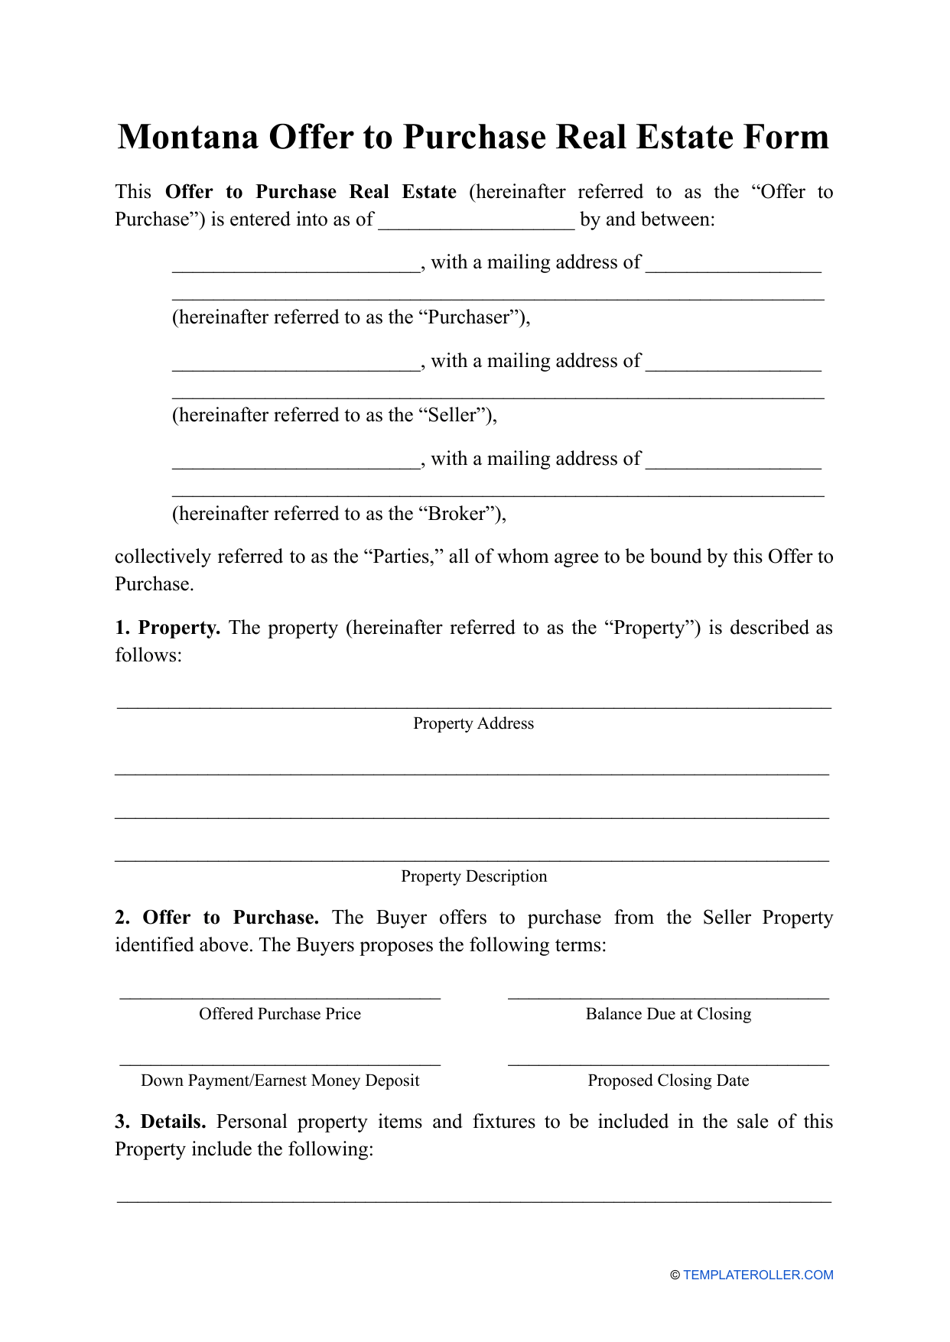 Offer to Purchase Real Estate Form - Montana, Page 1